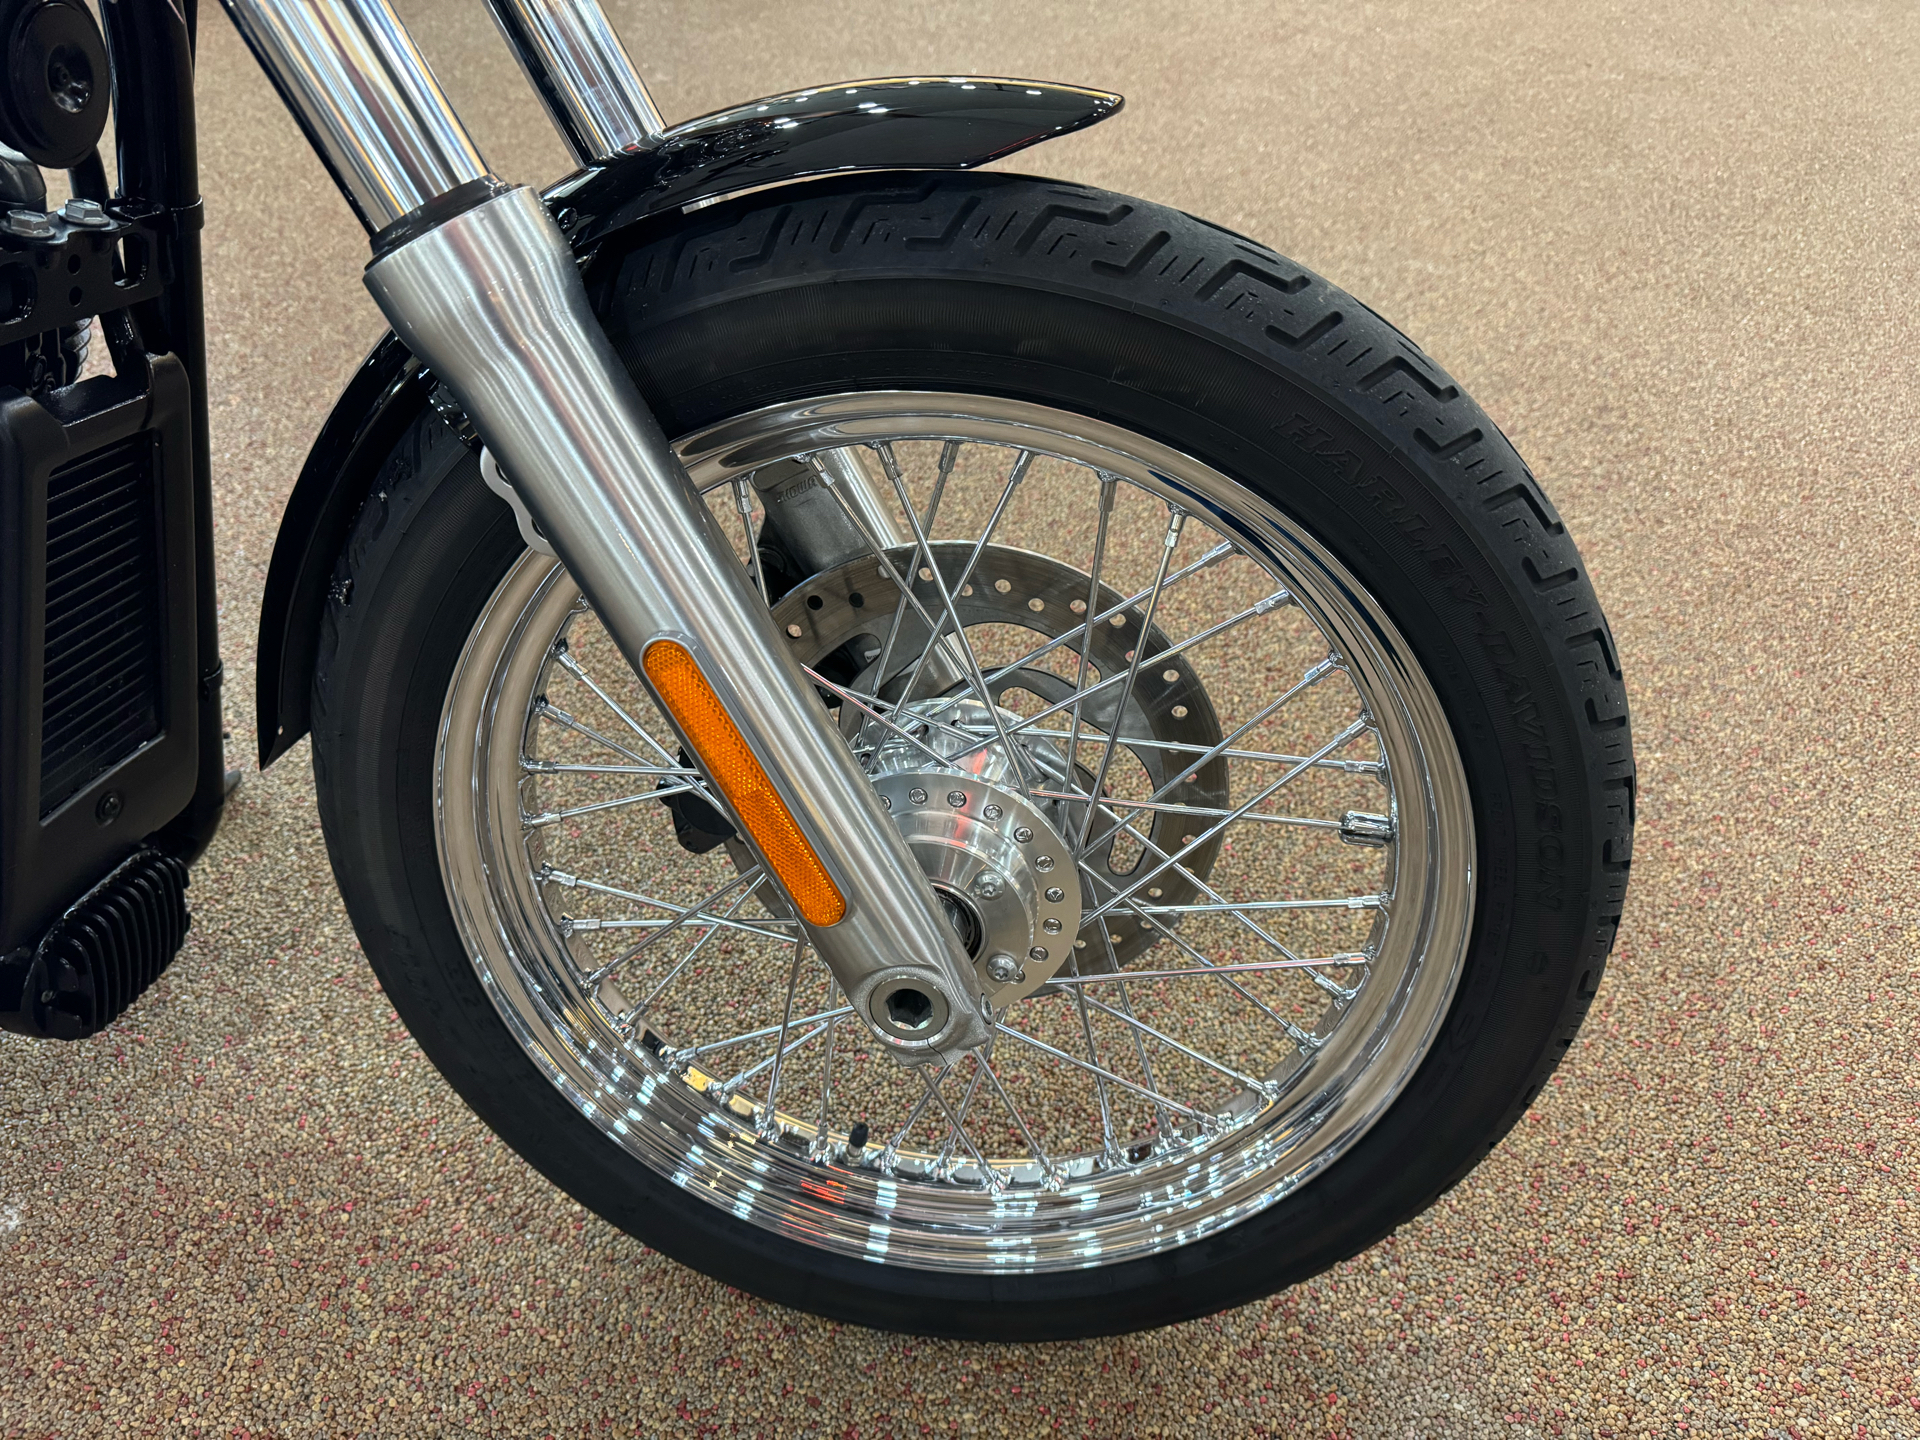 2020 Harley-Davidson Softail® Standard in Knoxville, Tennessee - Photo 4